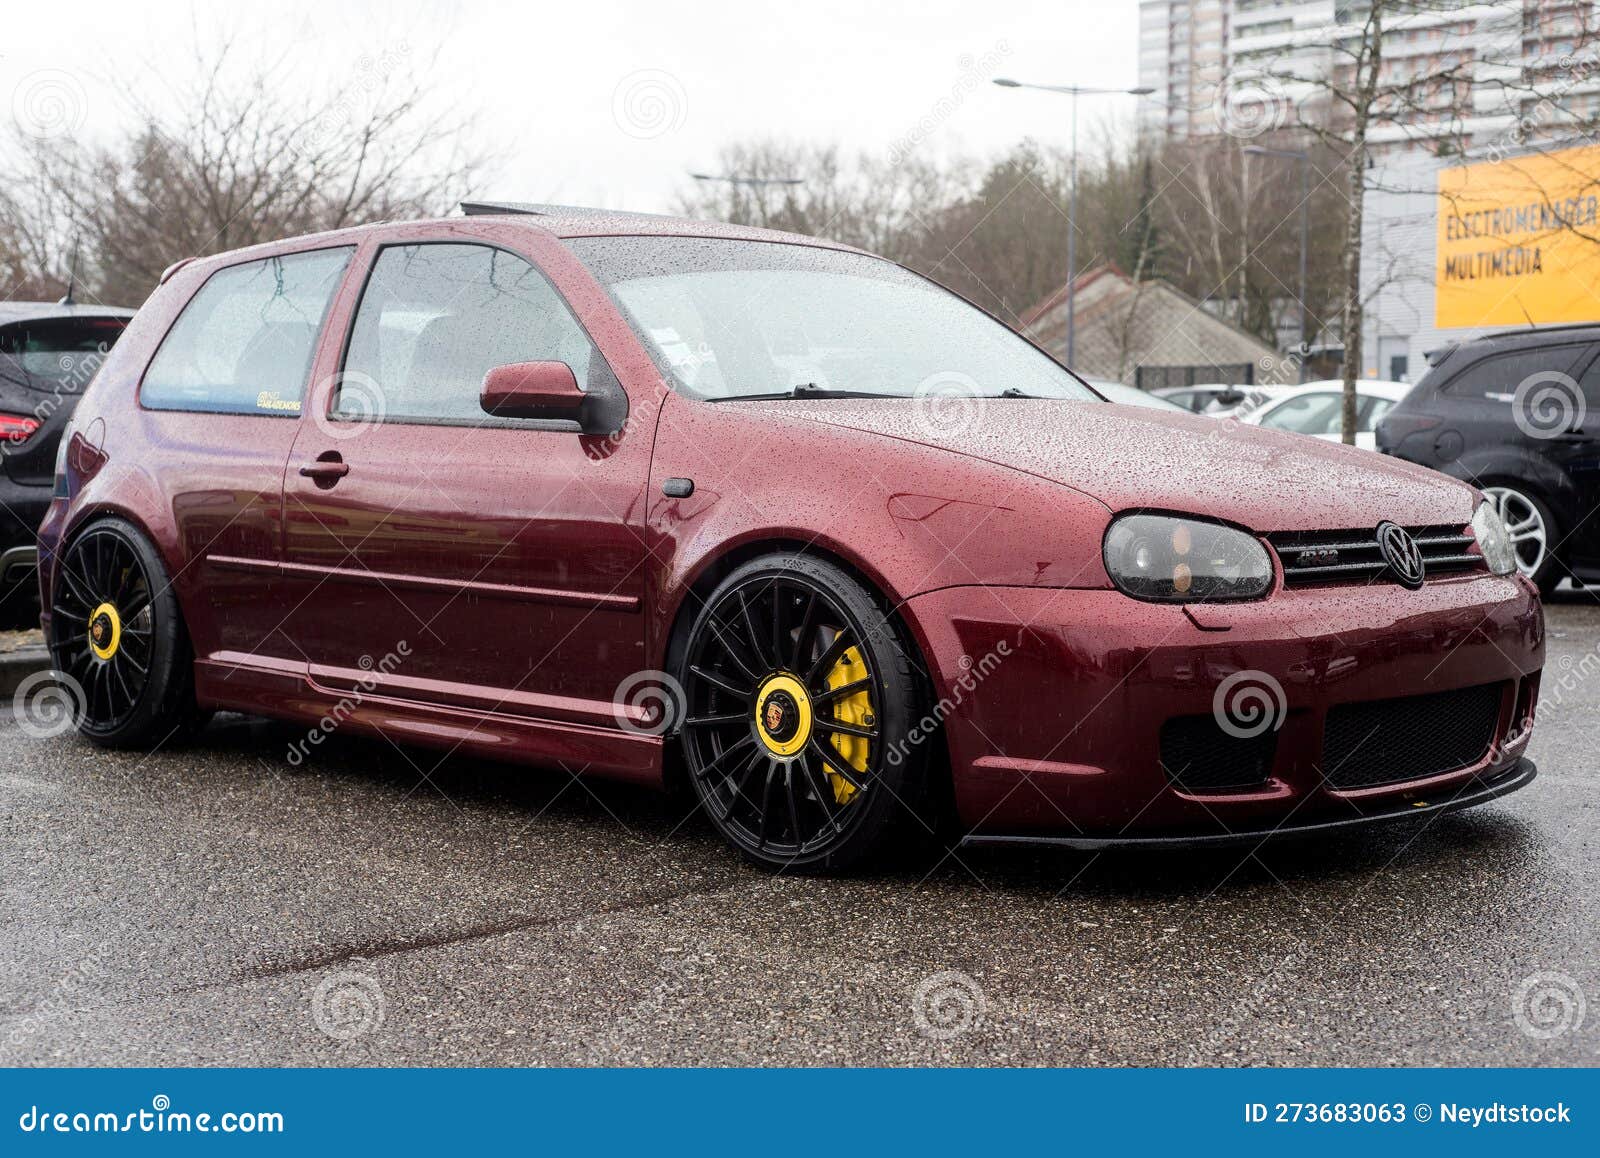 Front View of Red Volkswagen Golf 4 R32 Parked in the Streetby